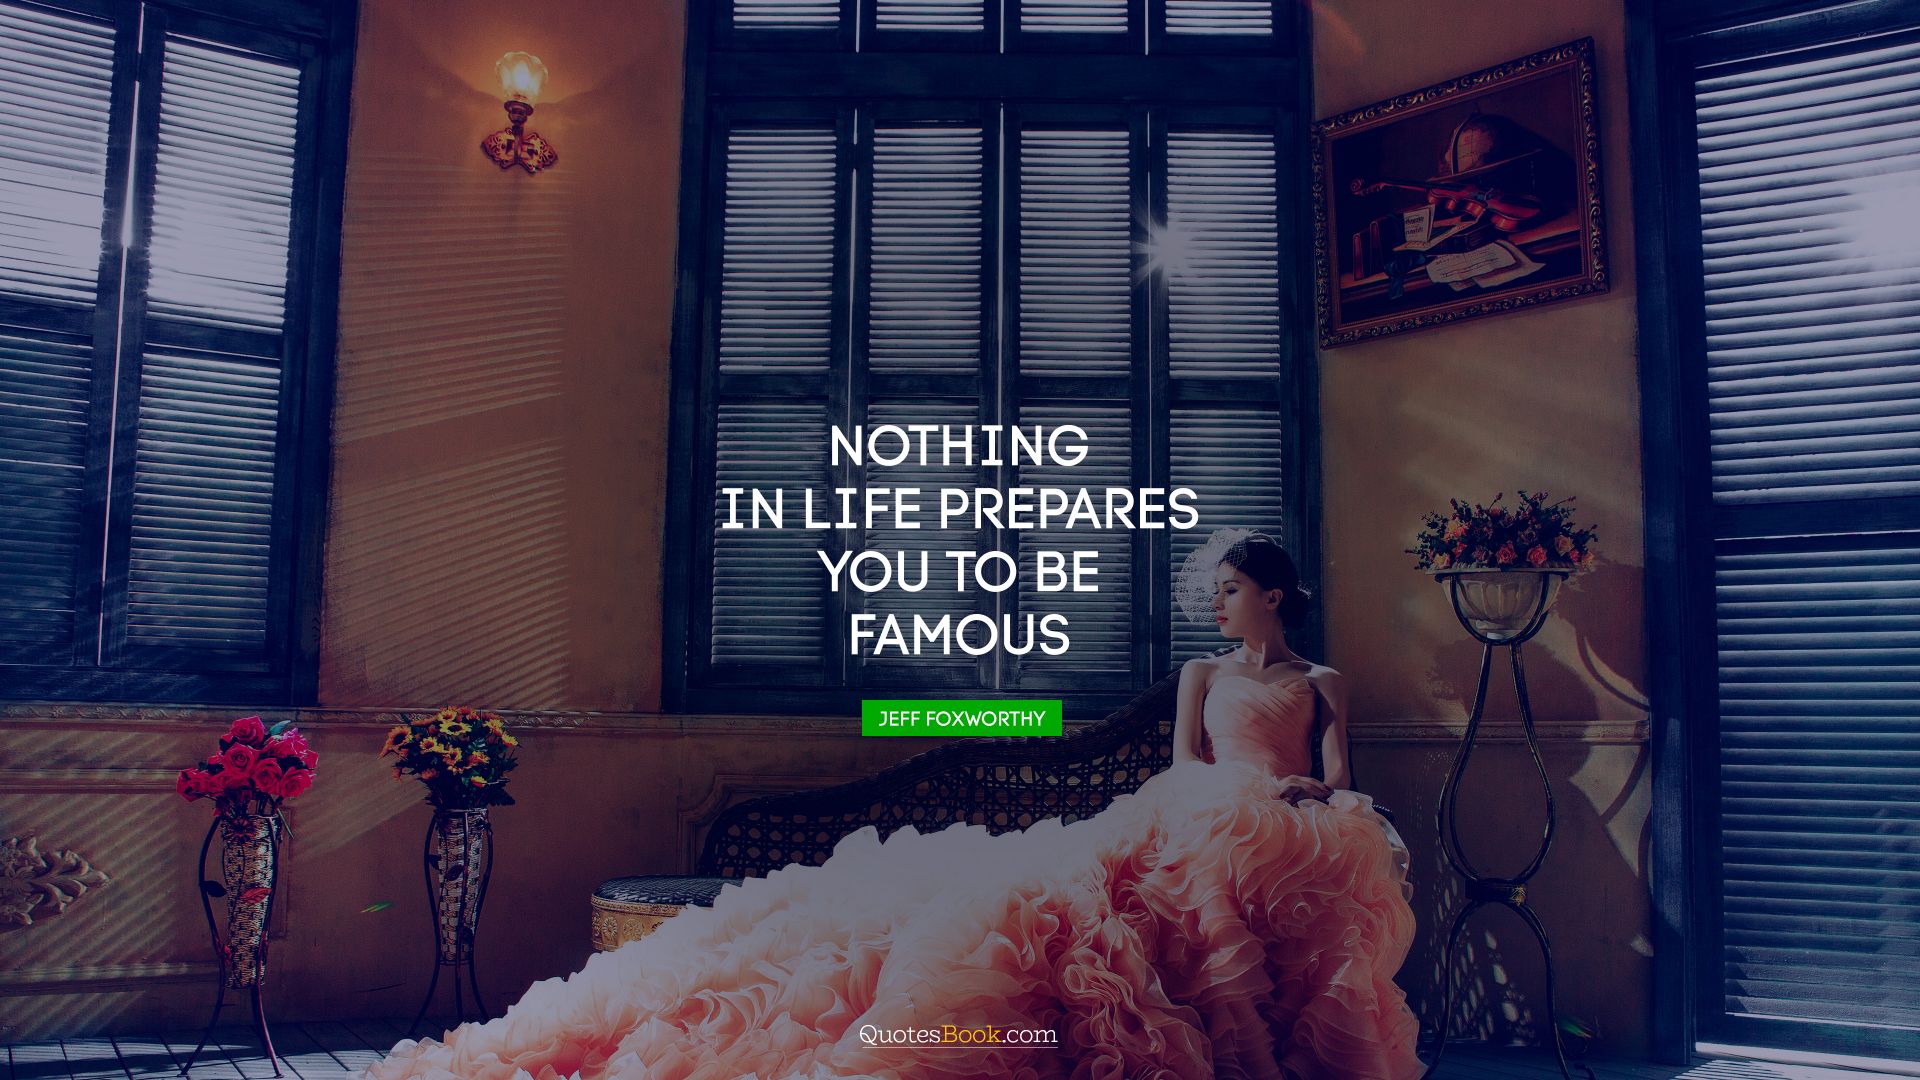 Nothing in life prepares you to be famous. - Quote by Jeff Foxworthy